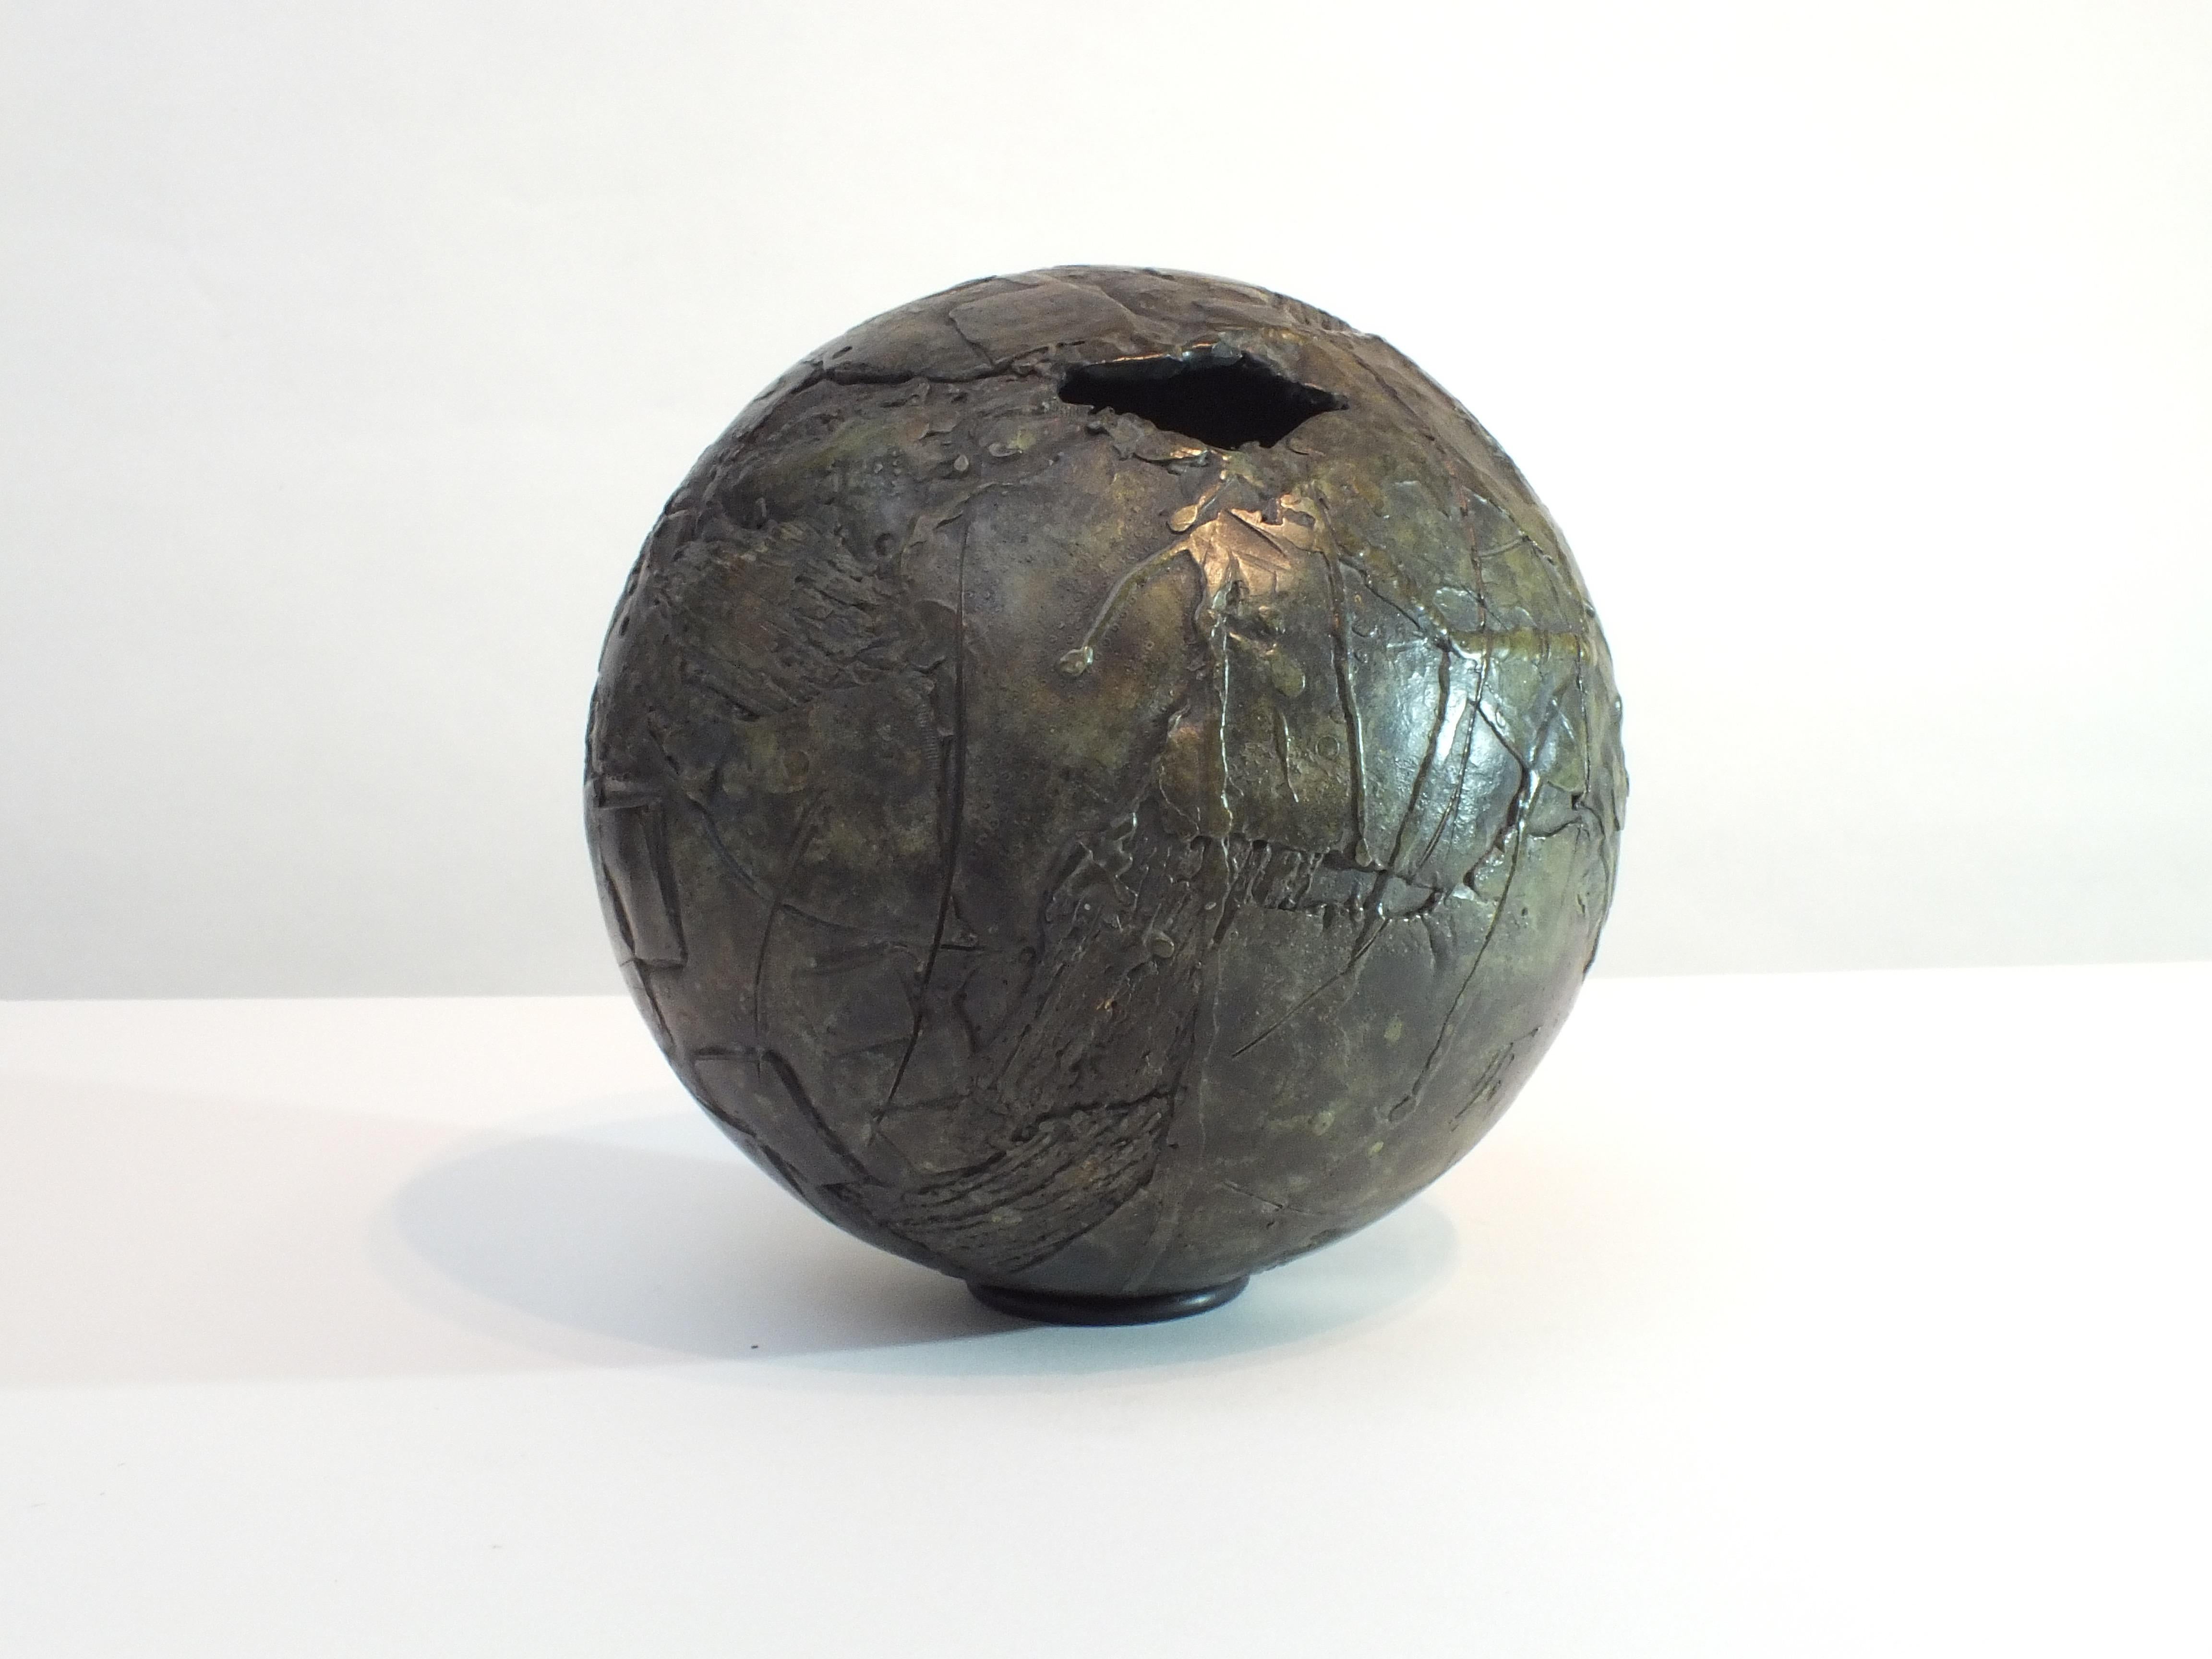 Tim was born in Derbyshire, England & from an early age was attuned to the natural world. He came to art later in life and forges his sculptures using mainly the lost wax technique. His materials are bronze, steel and iron.

Living in the idyllic